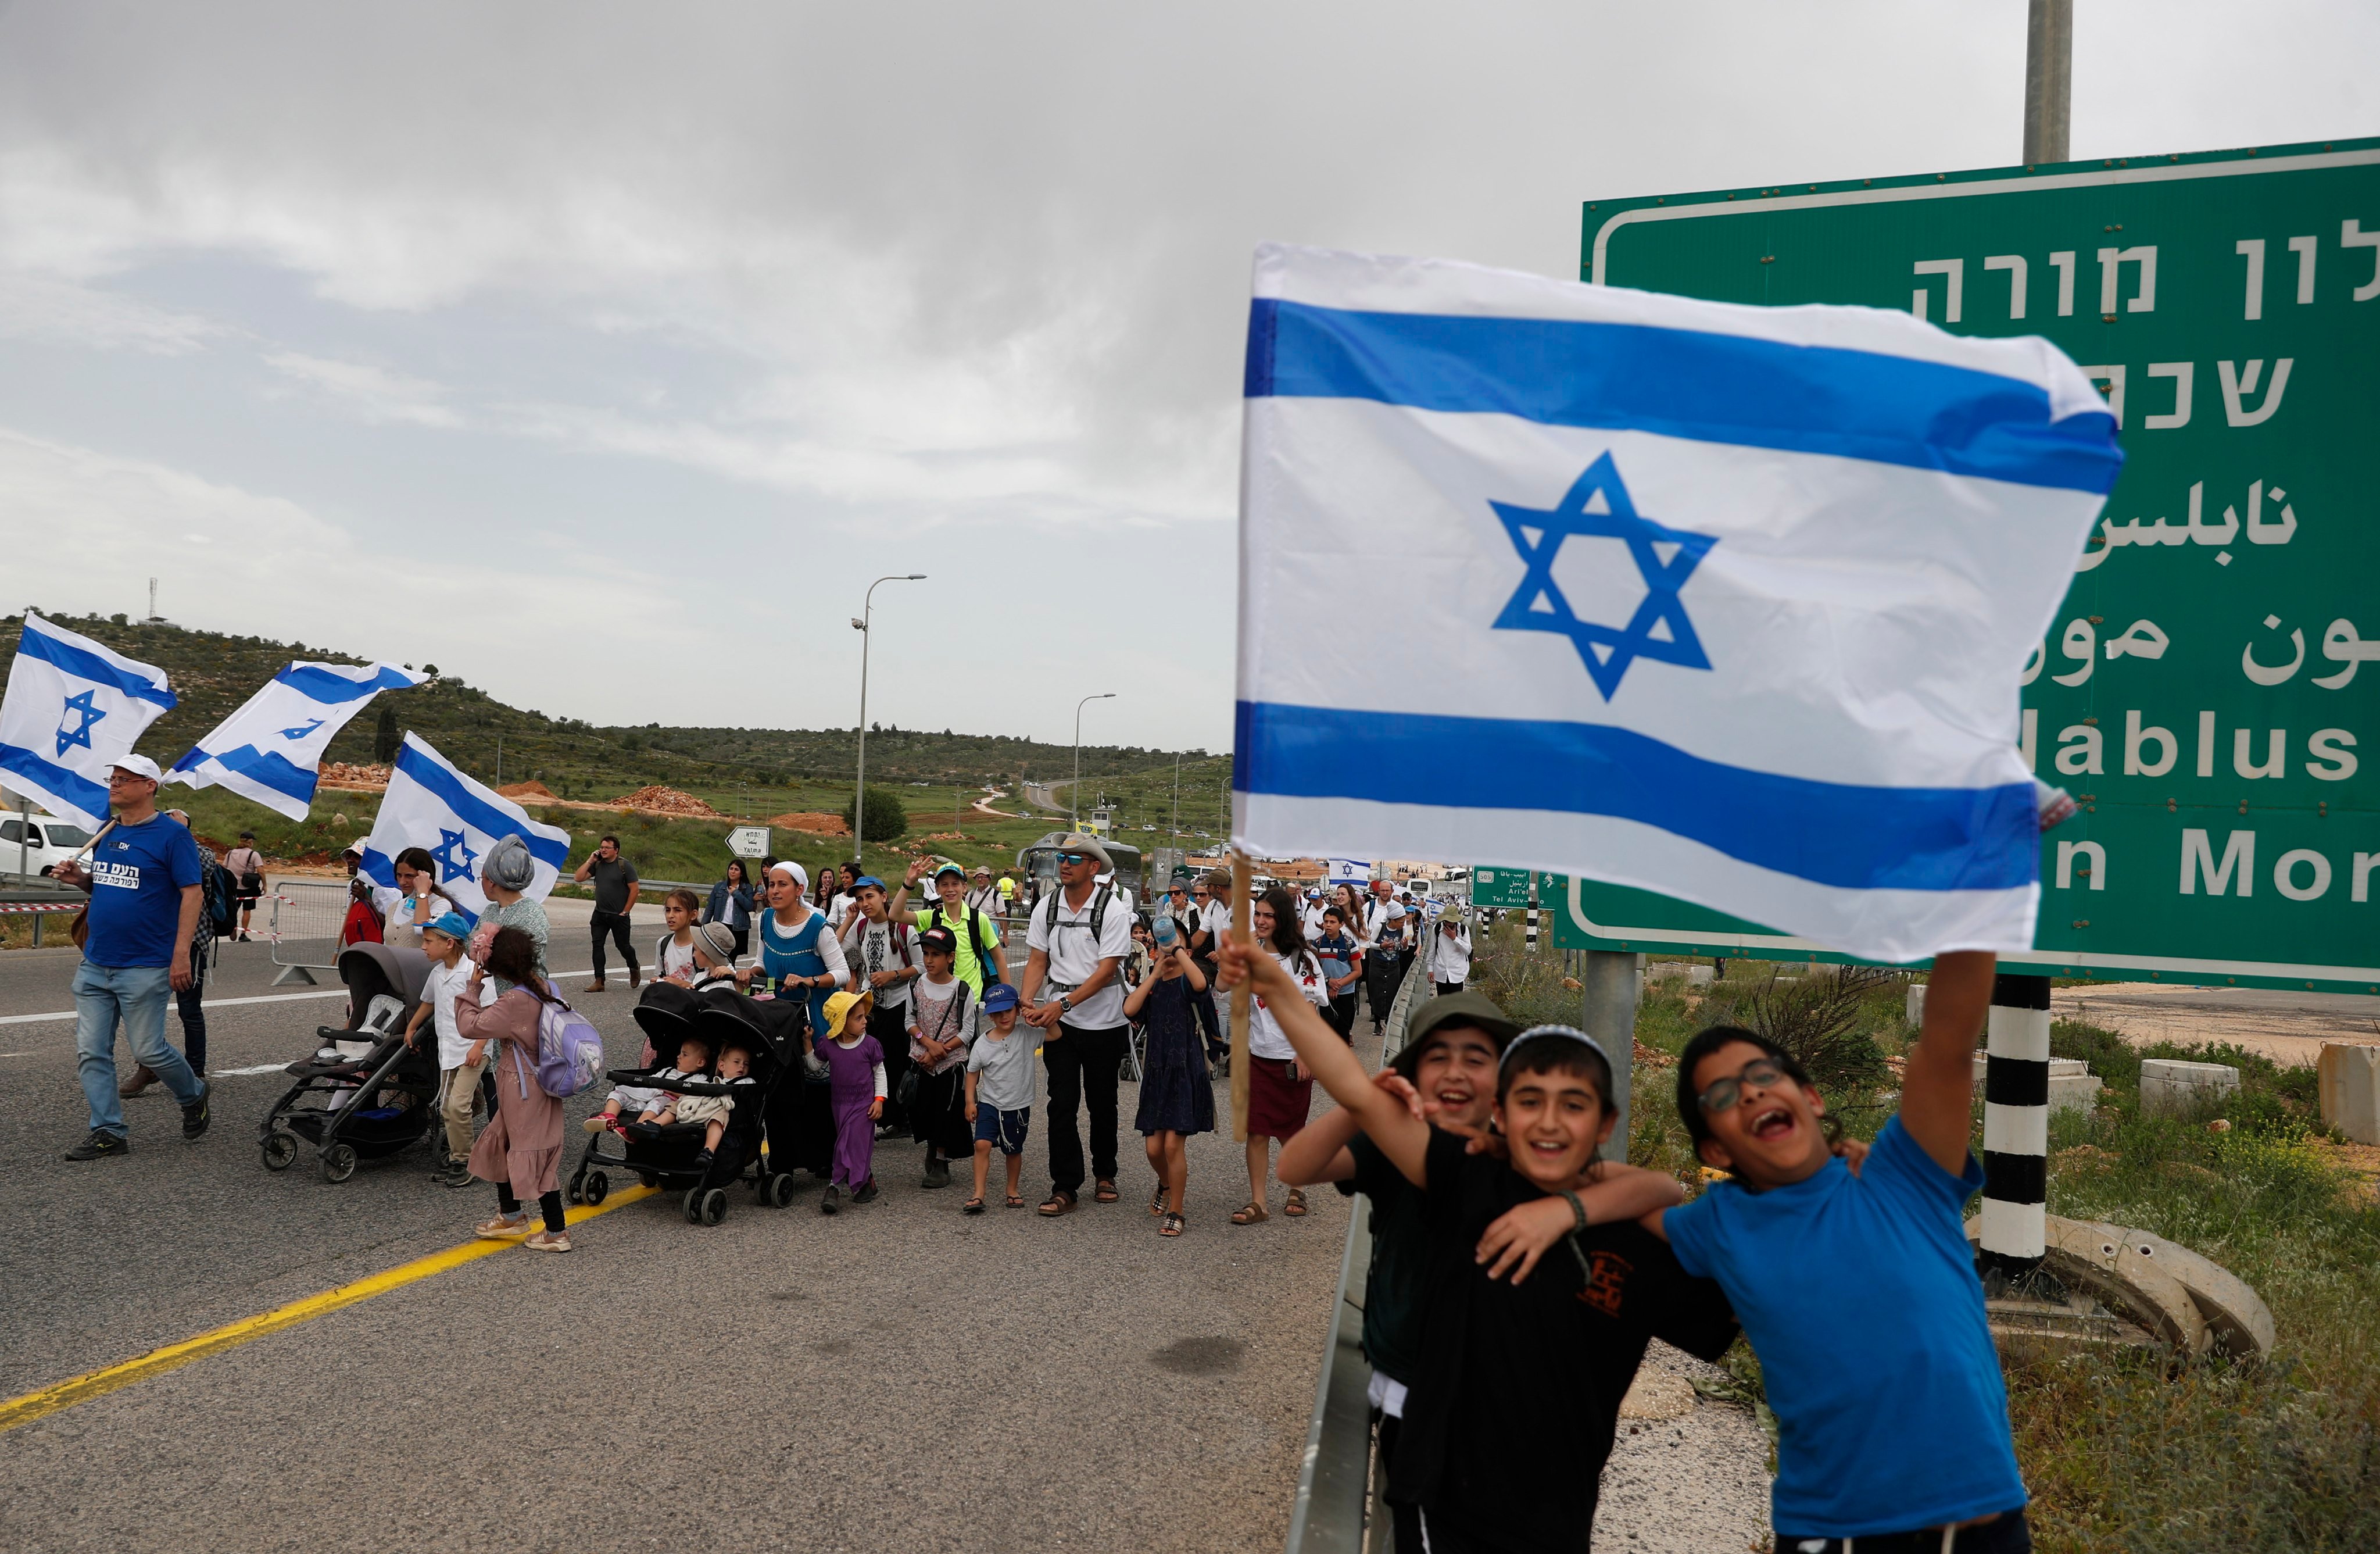 Israeli far-right supporters march near an illegal outpost near the West Bank city of Nablus, in April 2023. Palestinians say they are restricted by Israeli settlers from land and face harassment, intimidation and violence. Photo: EPA-EFE